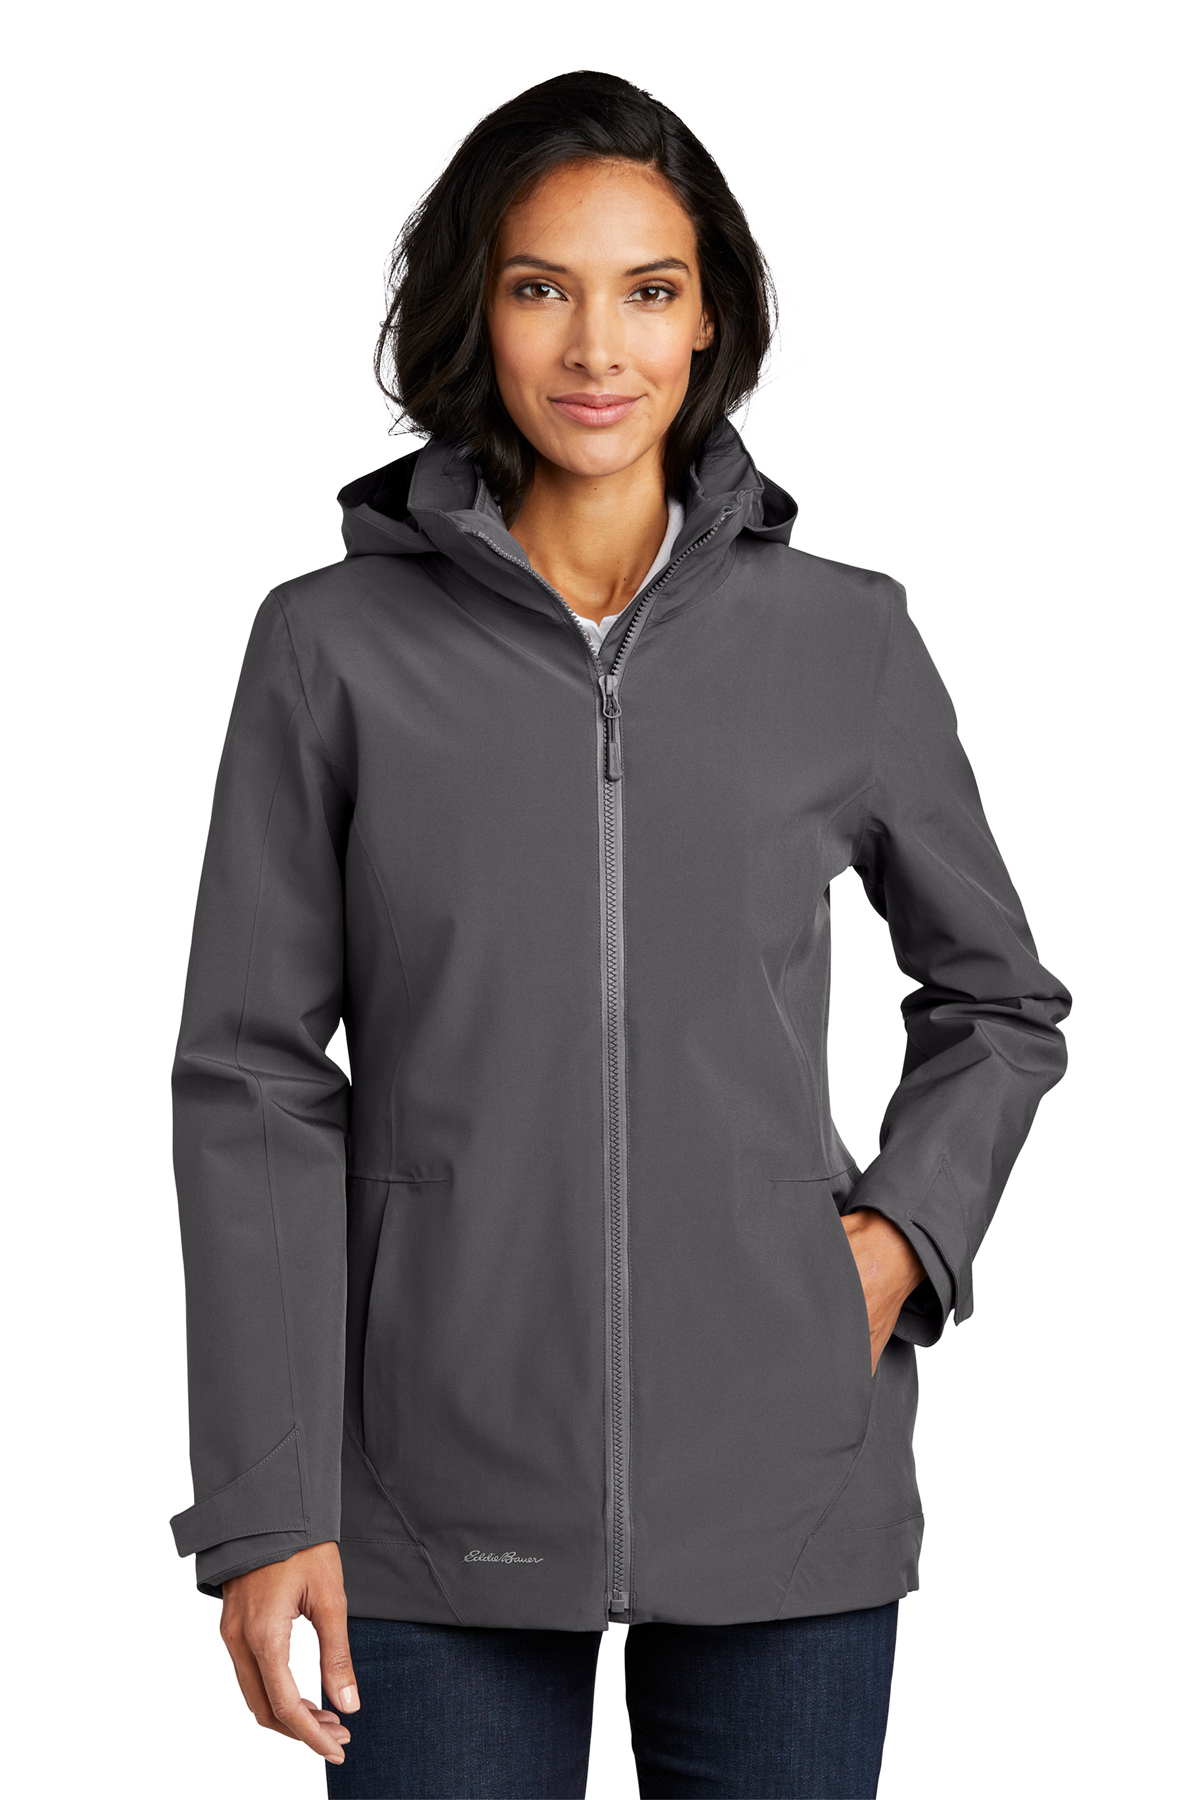 Eddie Bauer Ladies WeatherEdge 3-in-1 Jacket | Product | Company Casuals